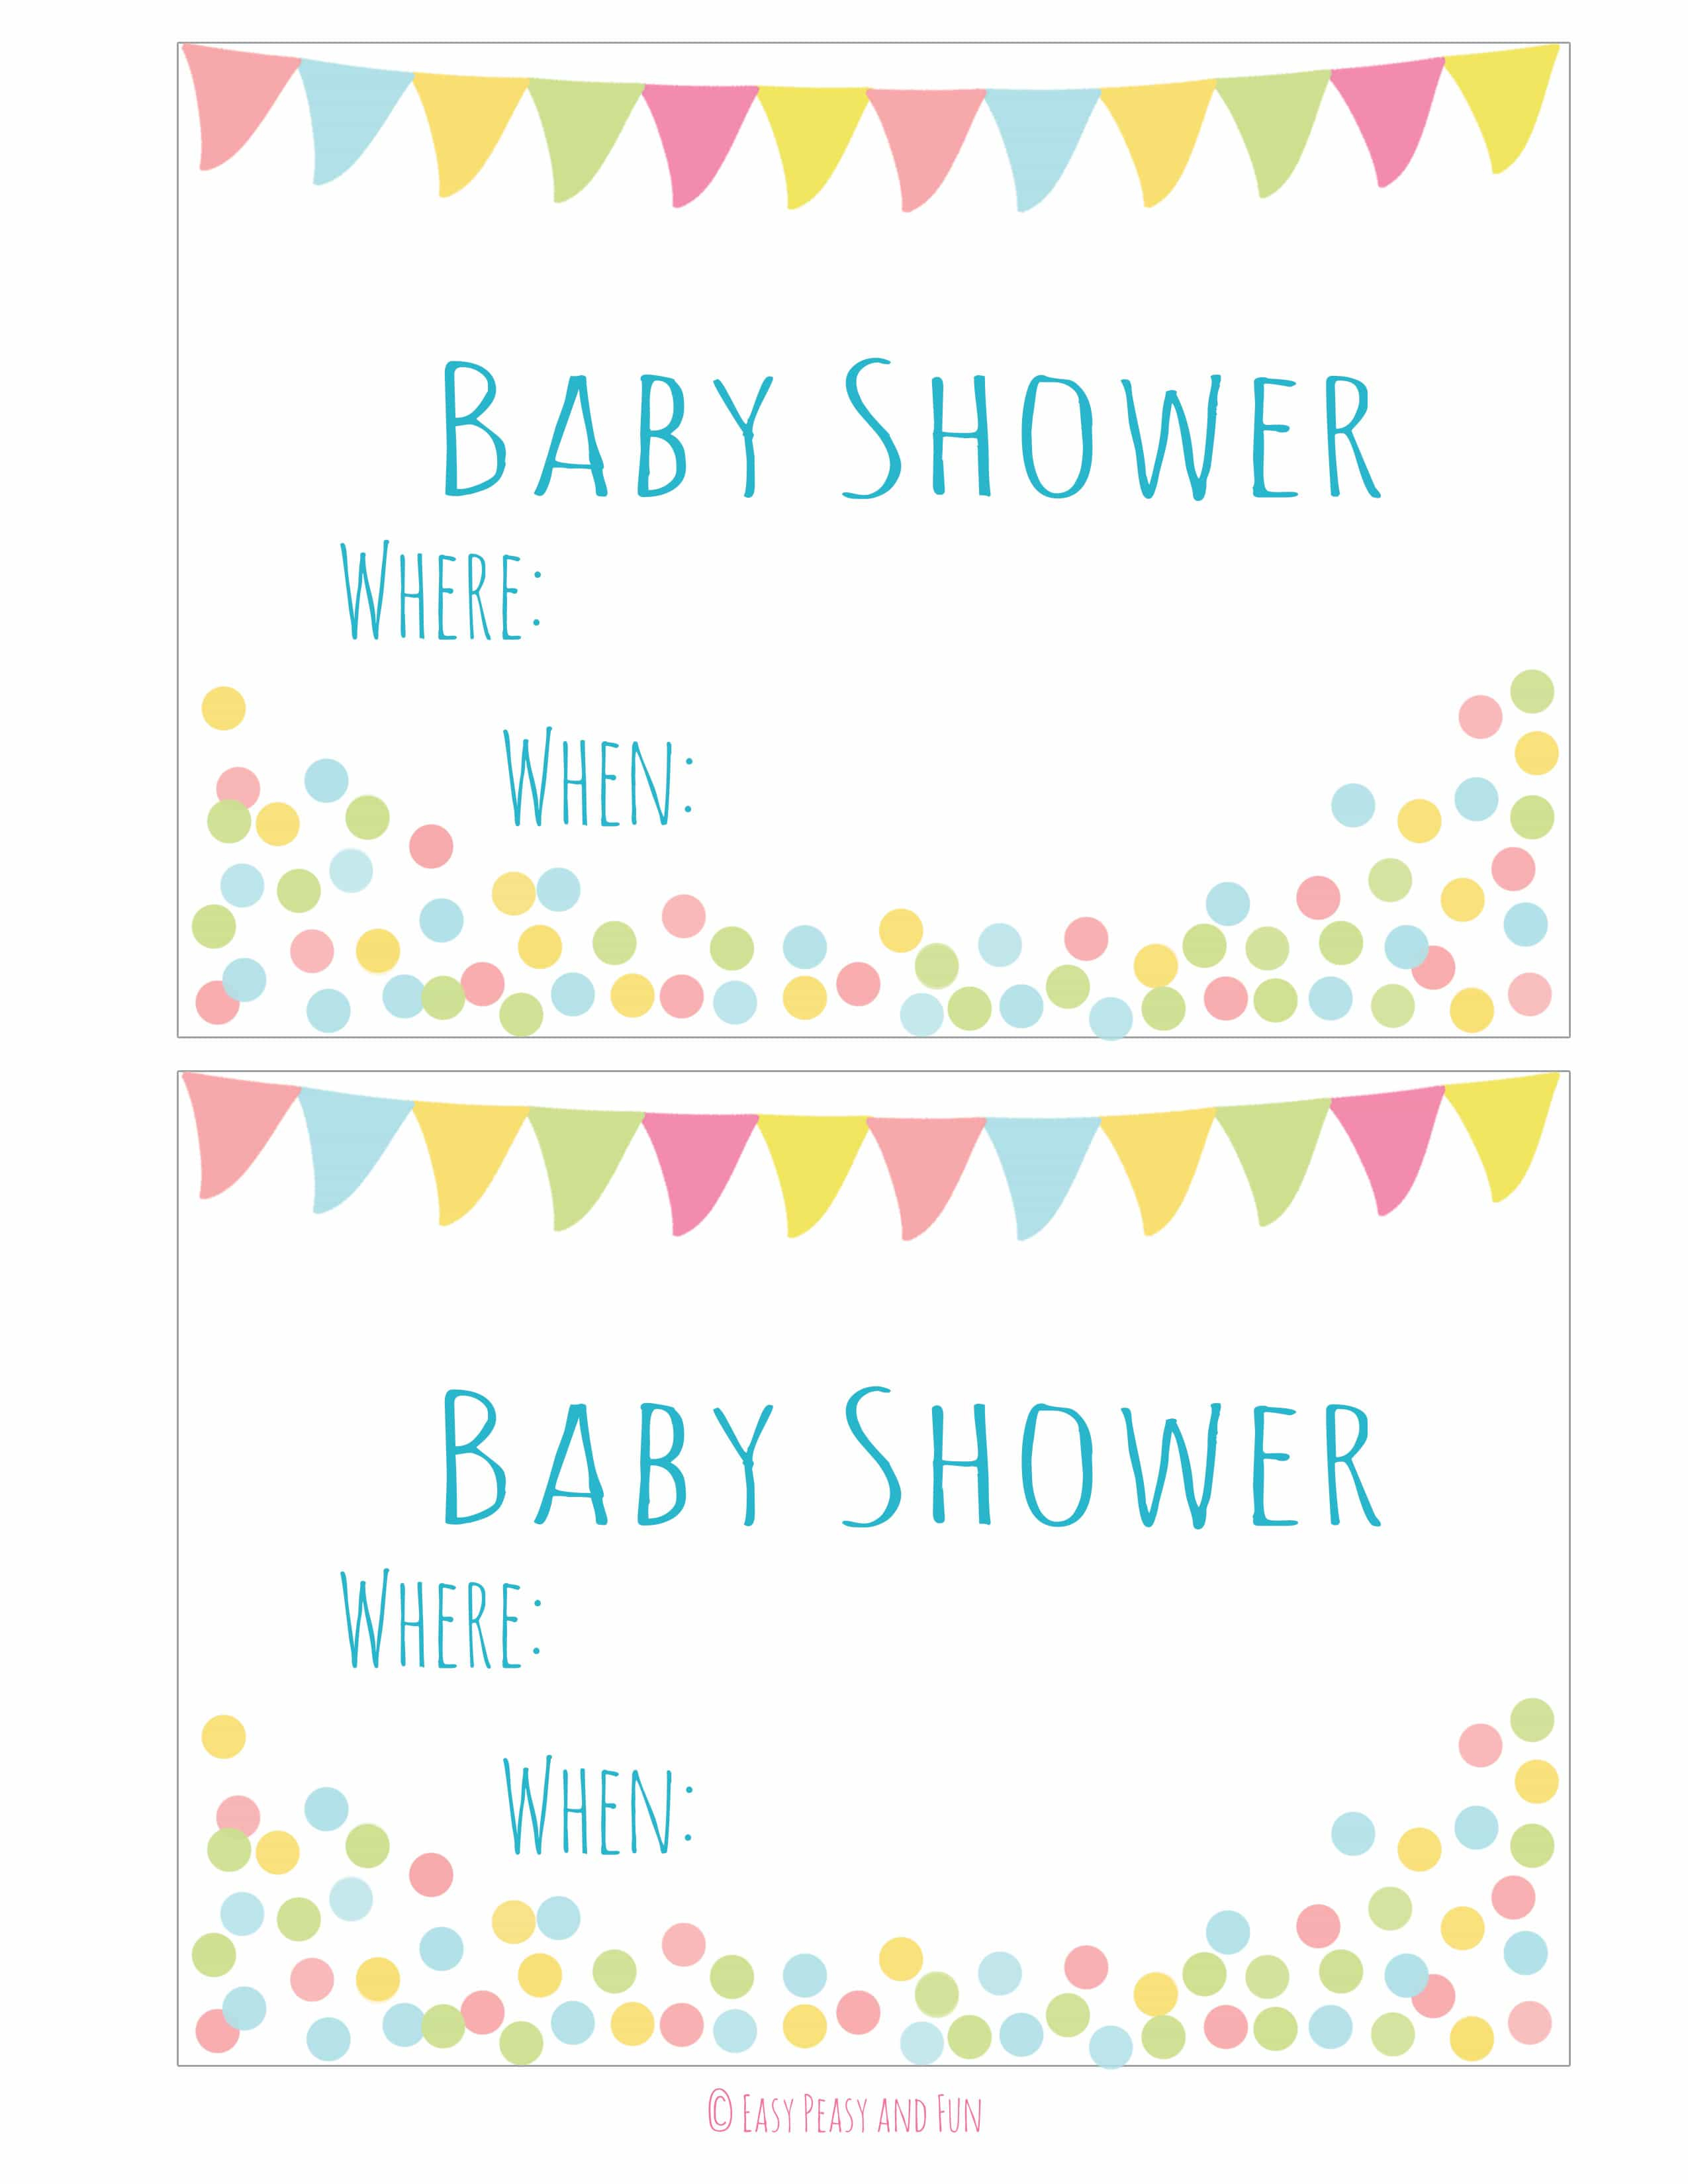 Free Printable Ba Shower Invitation Easy Peasy And Fun intended for dimensions 2550 X 3300